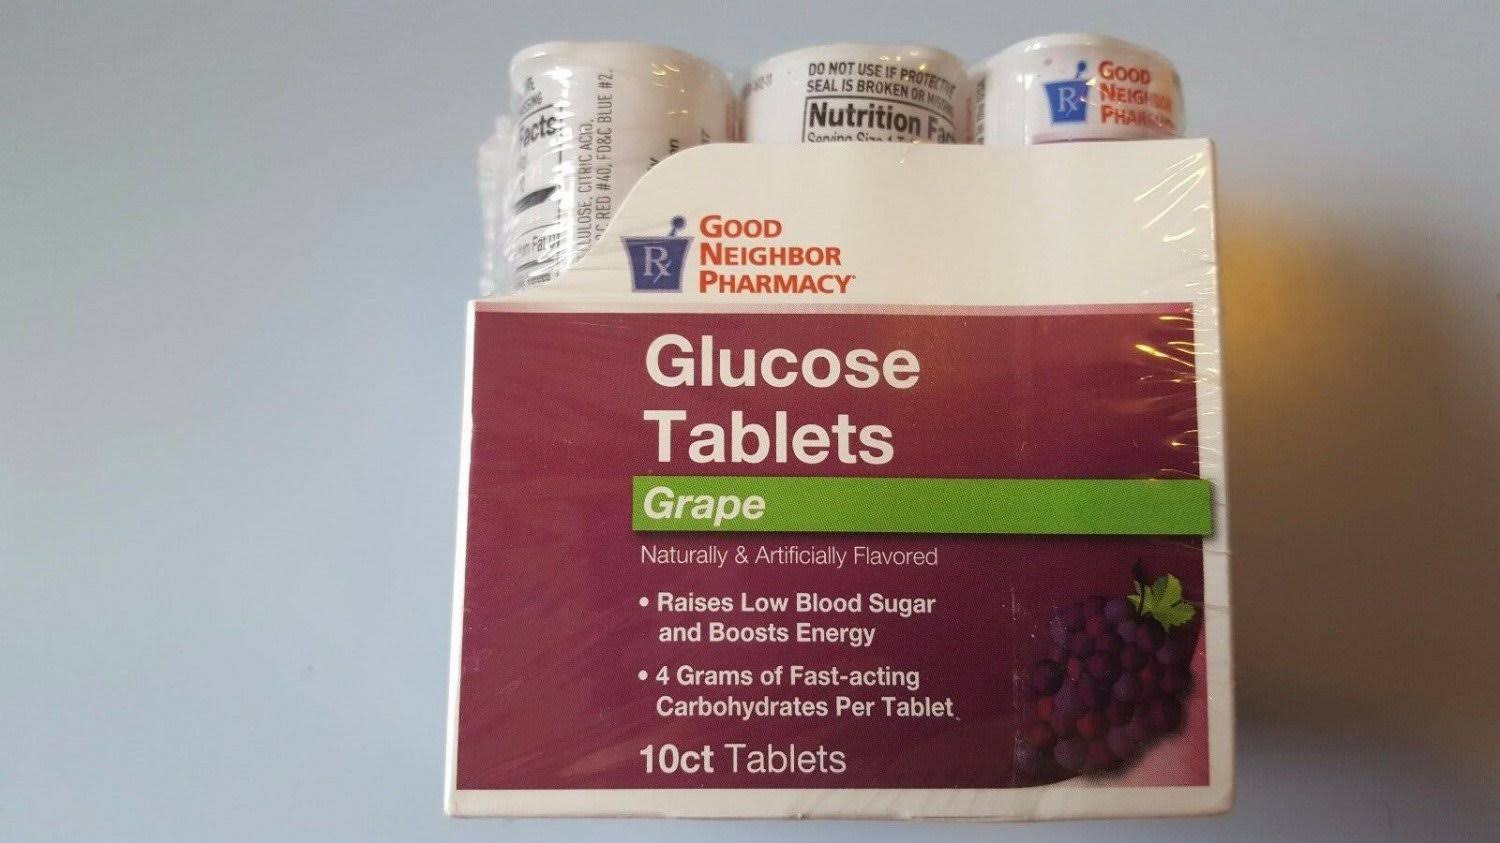 Glucose Tablets Grape Flavored 10 CT Sealed Good Neighbor Pharmacy BR